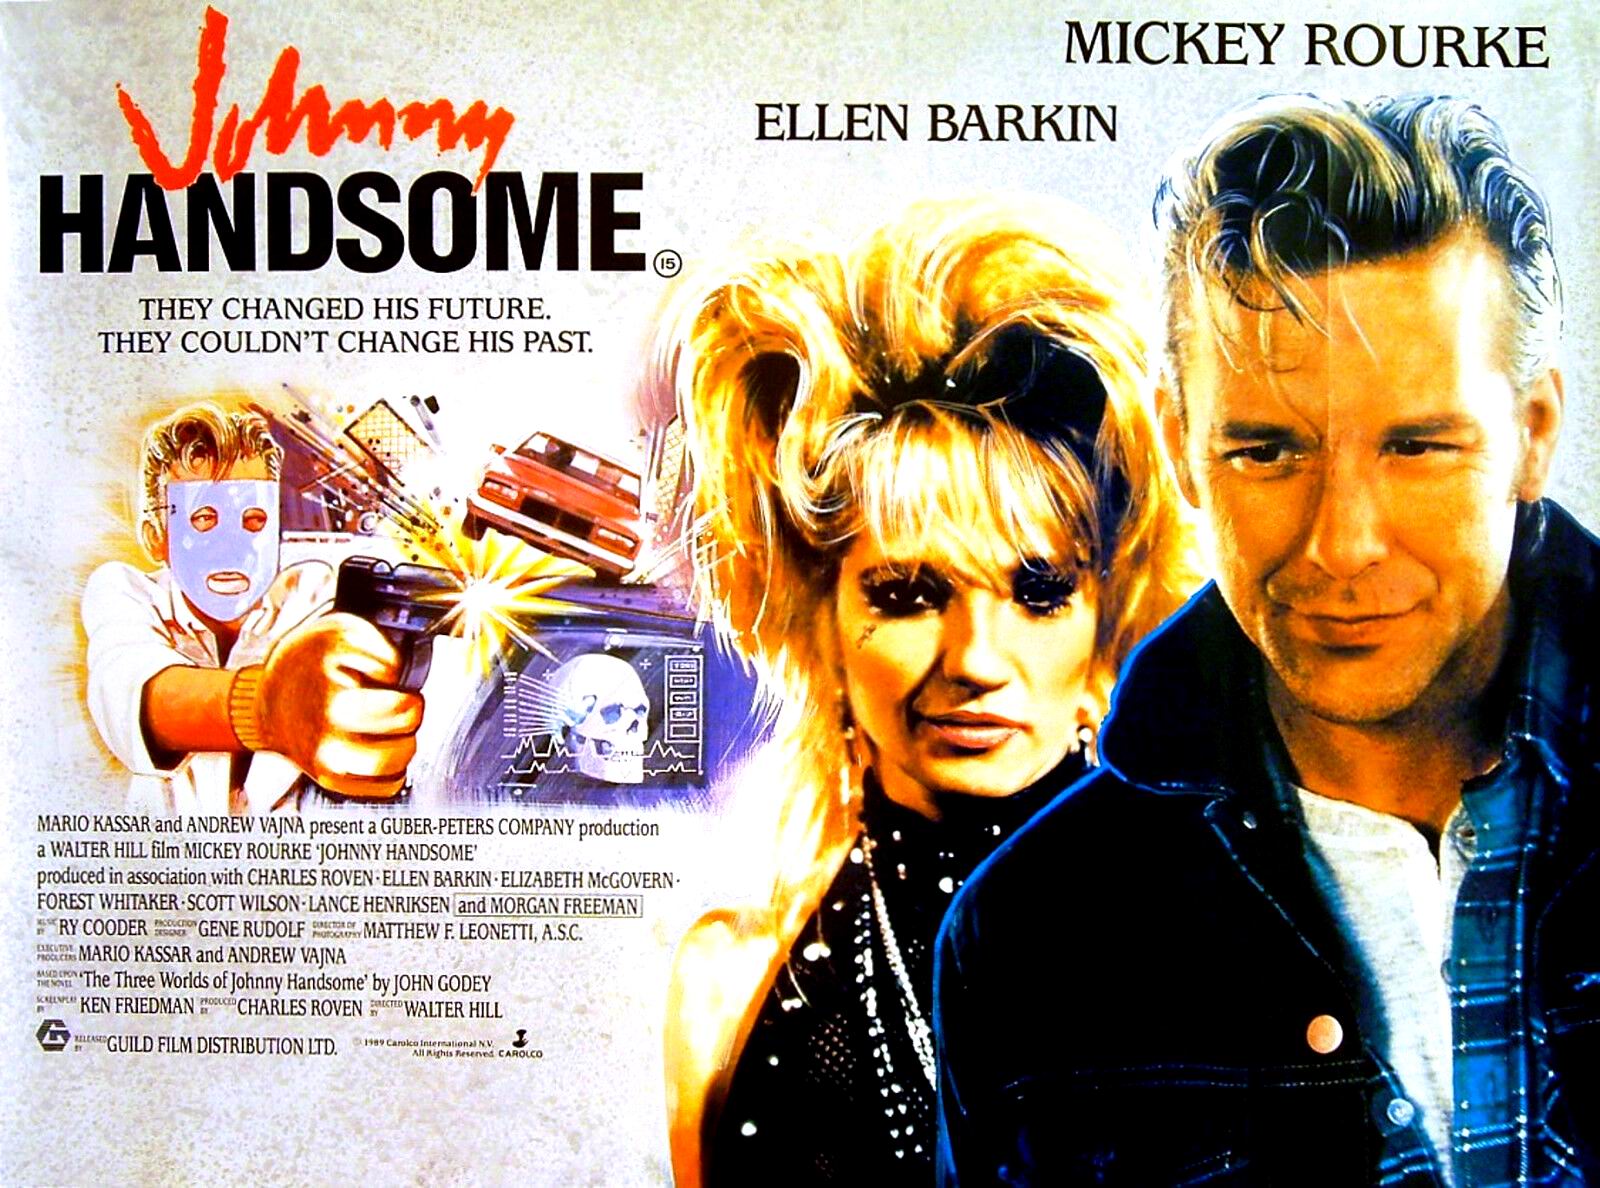 Johnny belle gueule (1988) Walter Hill - Johnny handsome (17.10.1988 / 1988)